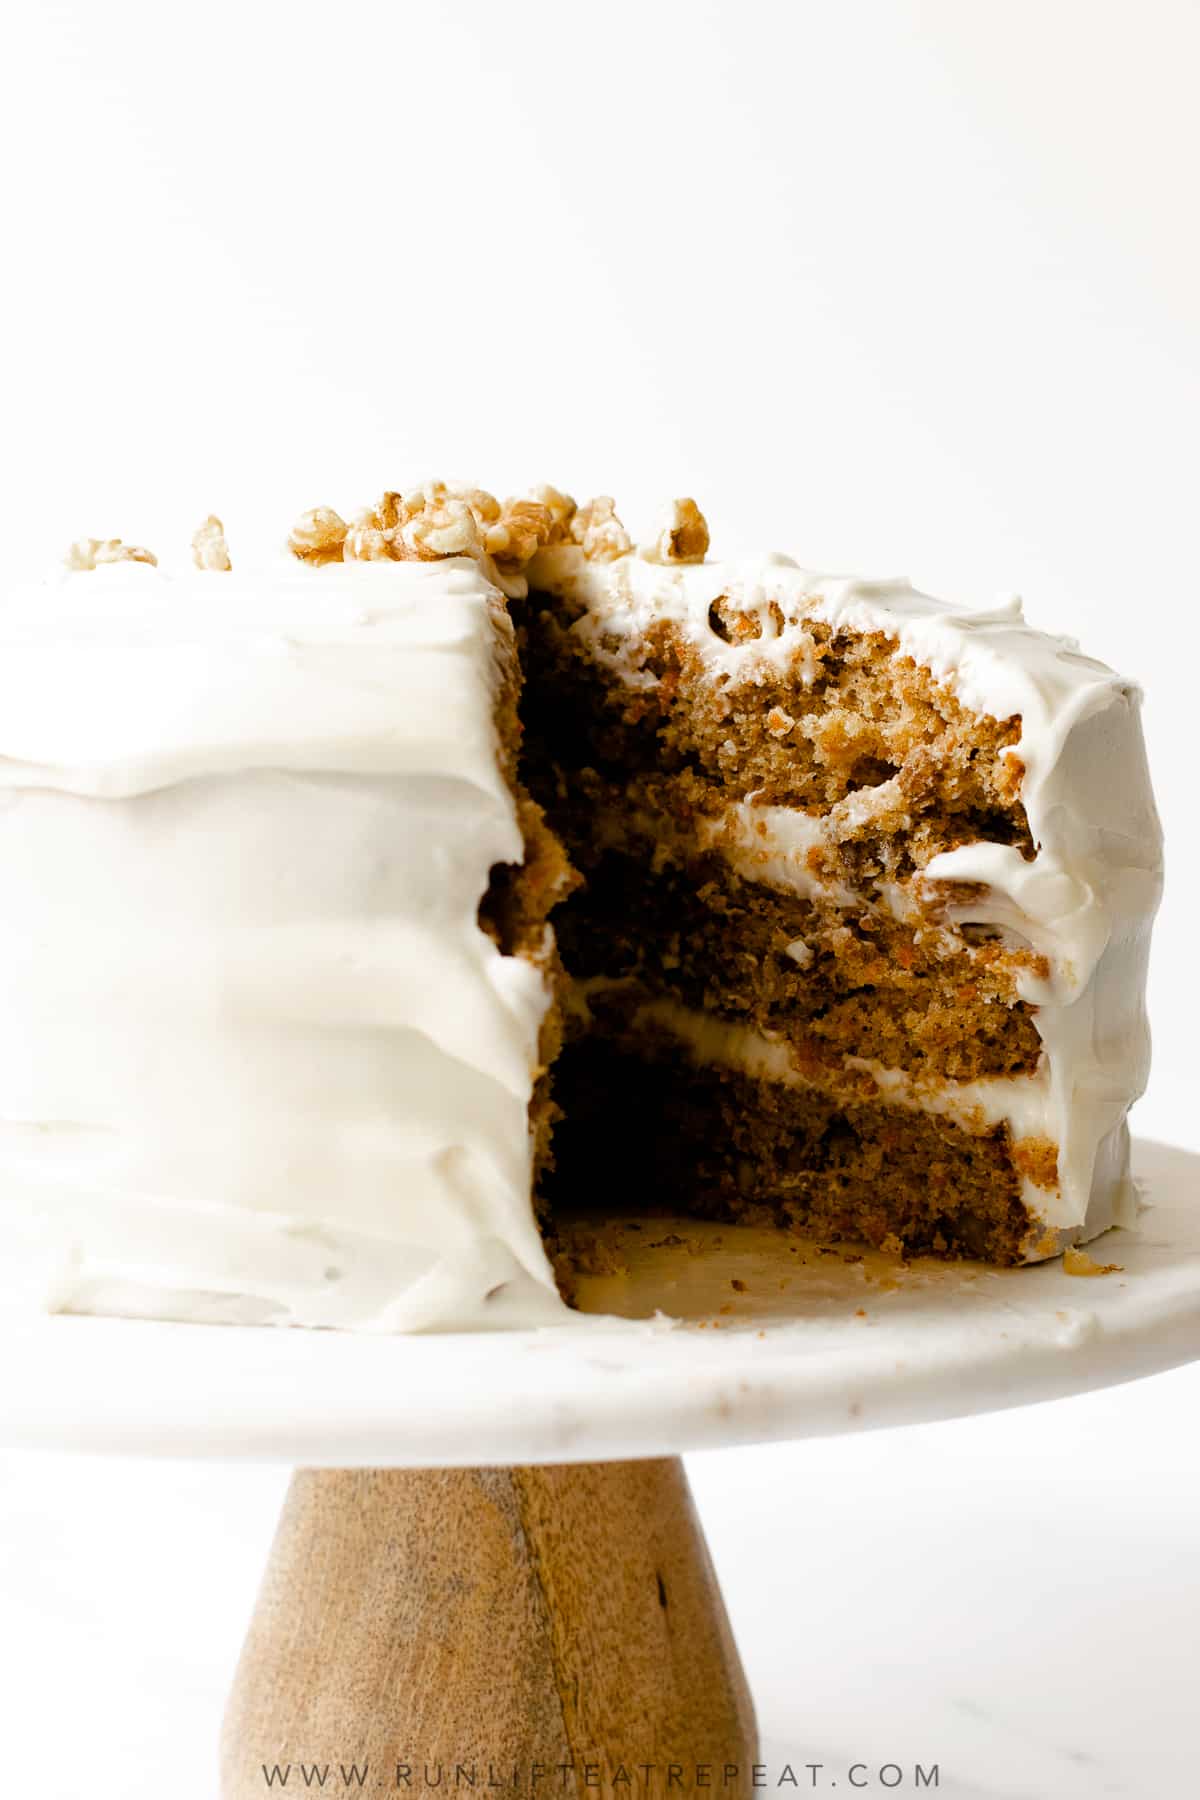 This carrot cake recipe is moist, bursting with spice flavor and topped with cream cheese frosting.